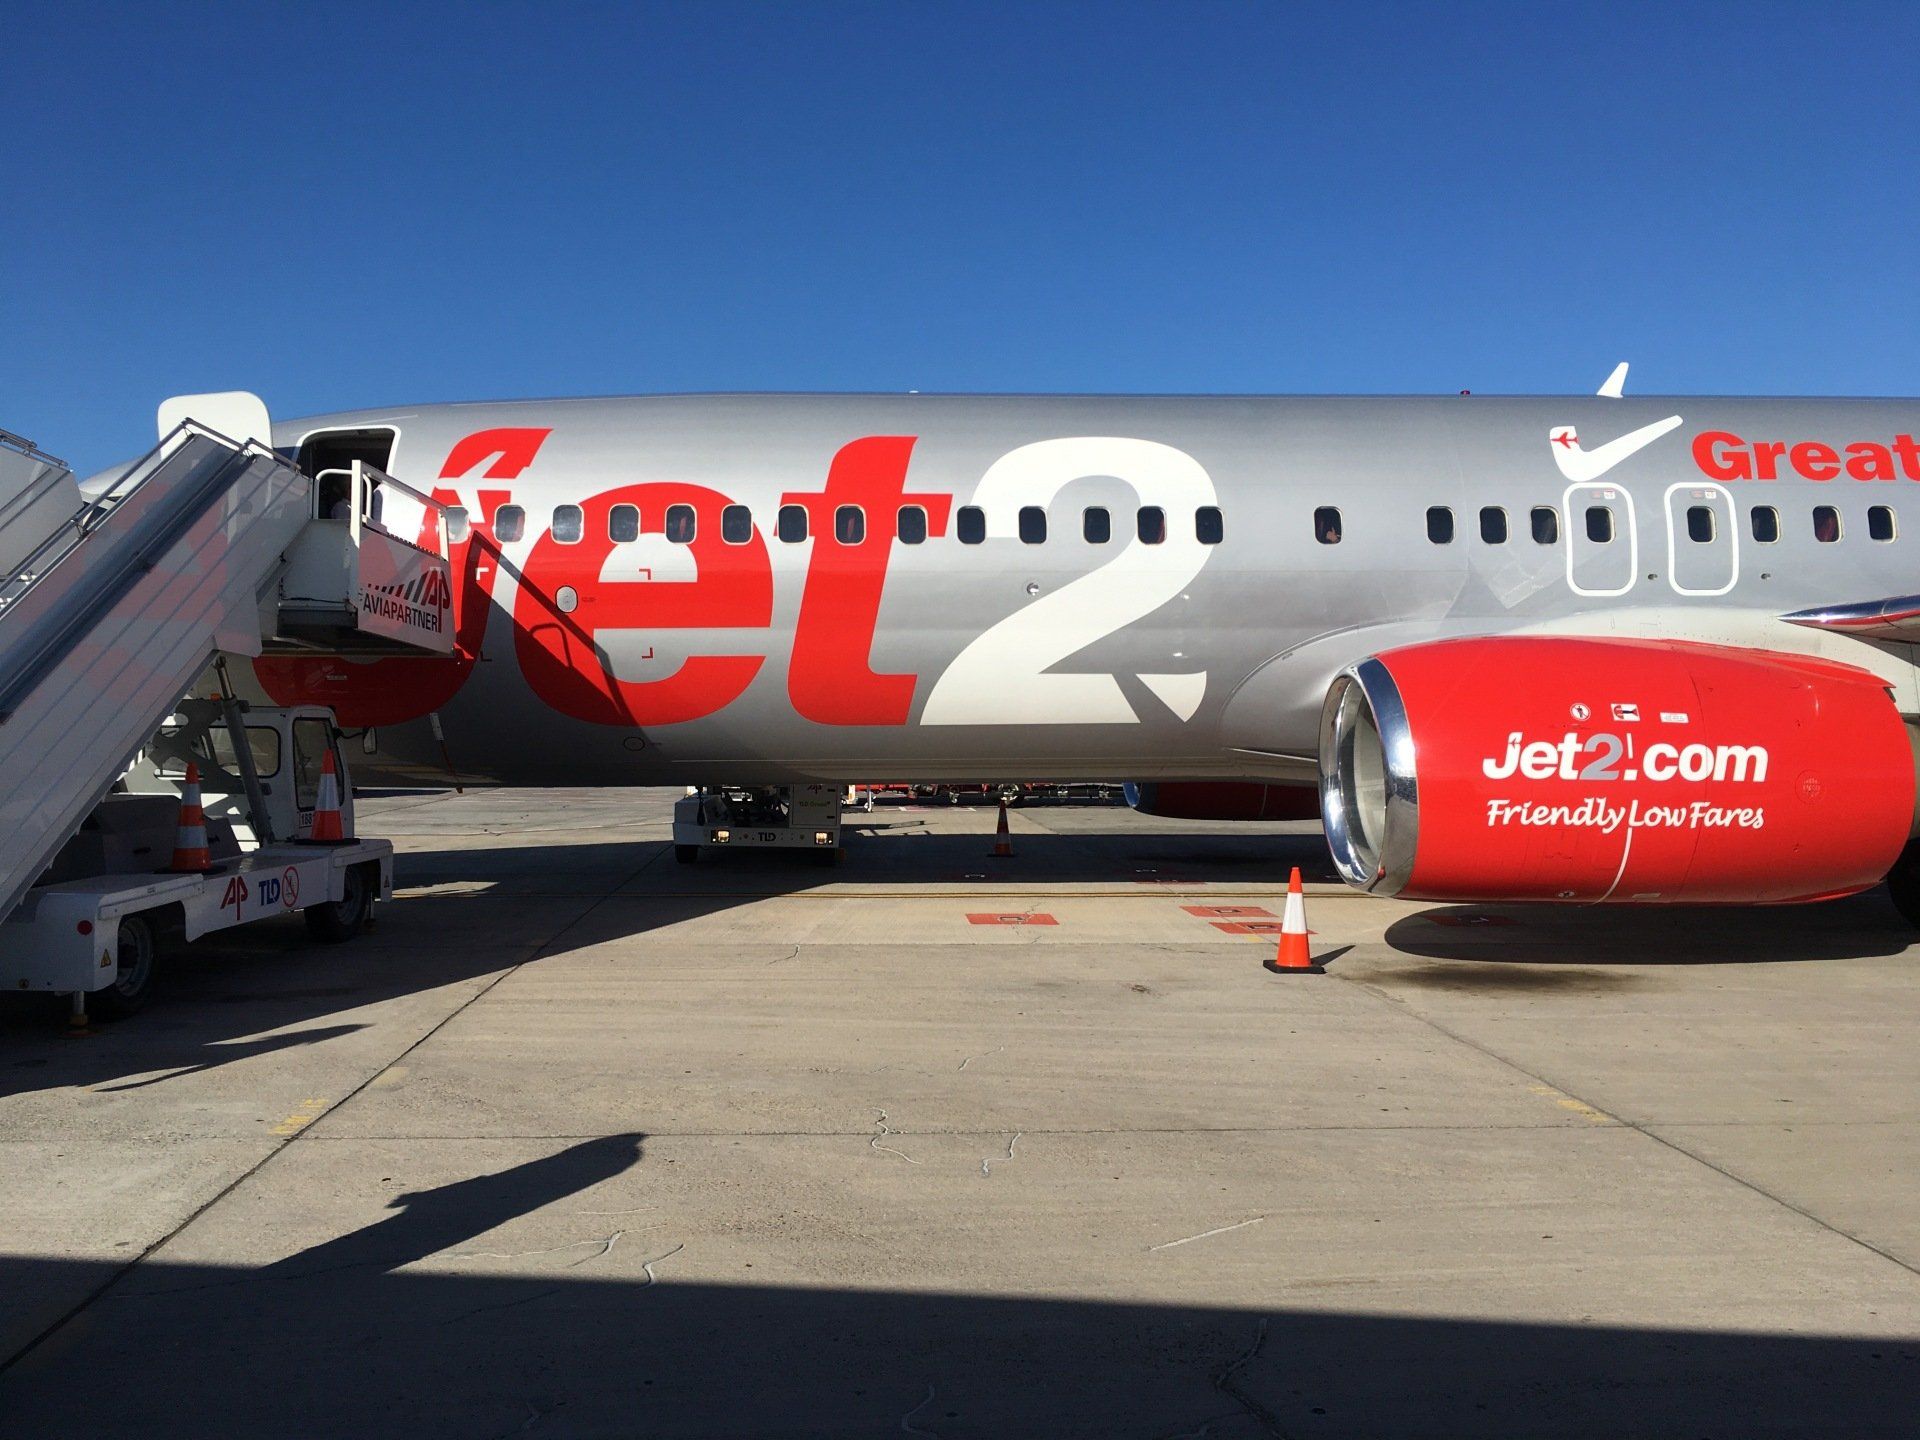 Photograph of side of Jet2.com airplane on tarmac prior to passengers boarding